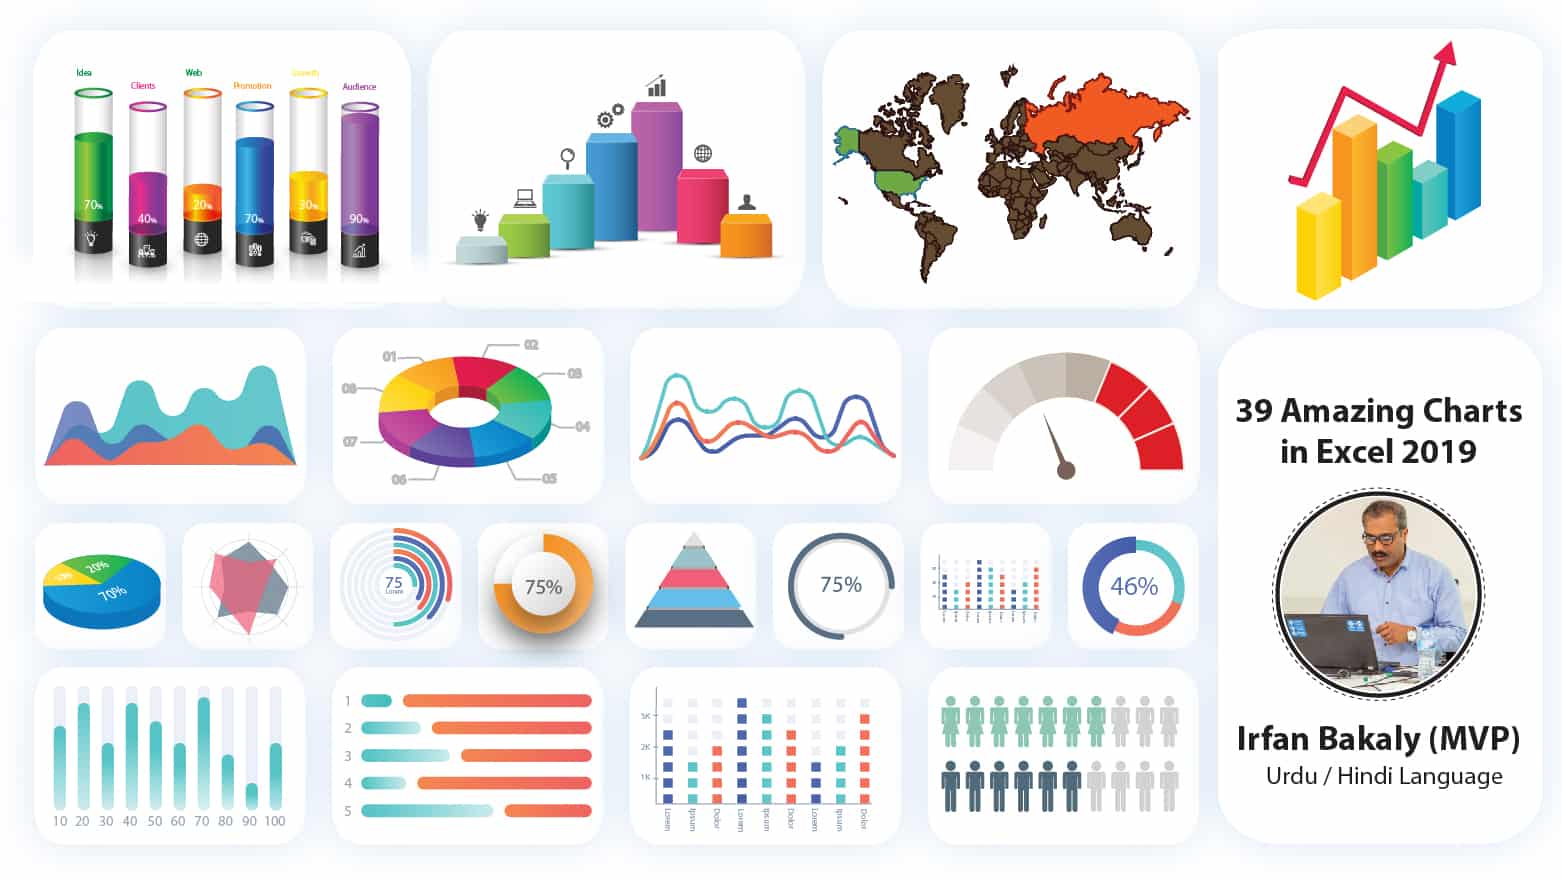 39 Amazing Charts in Excel